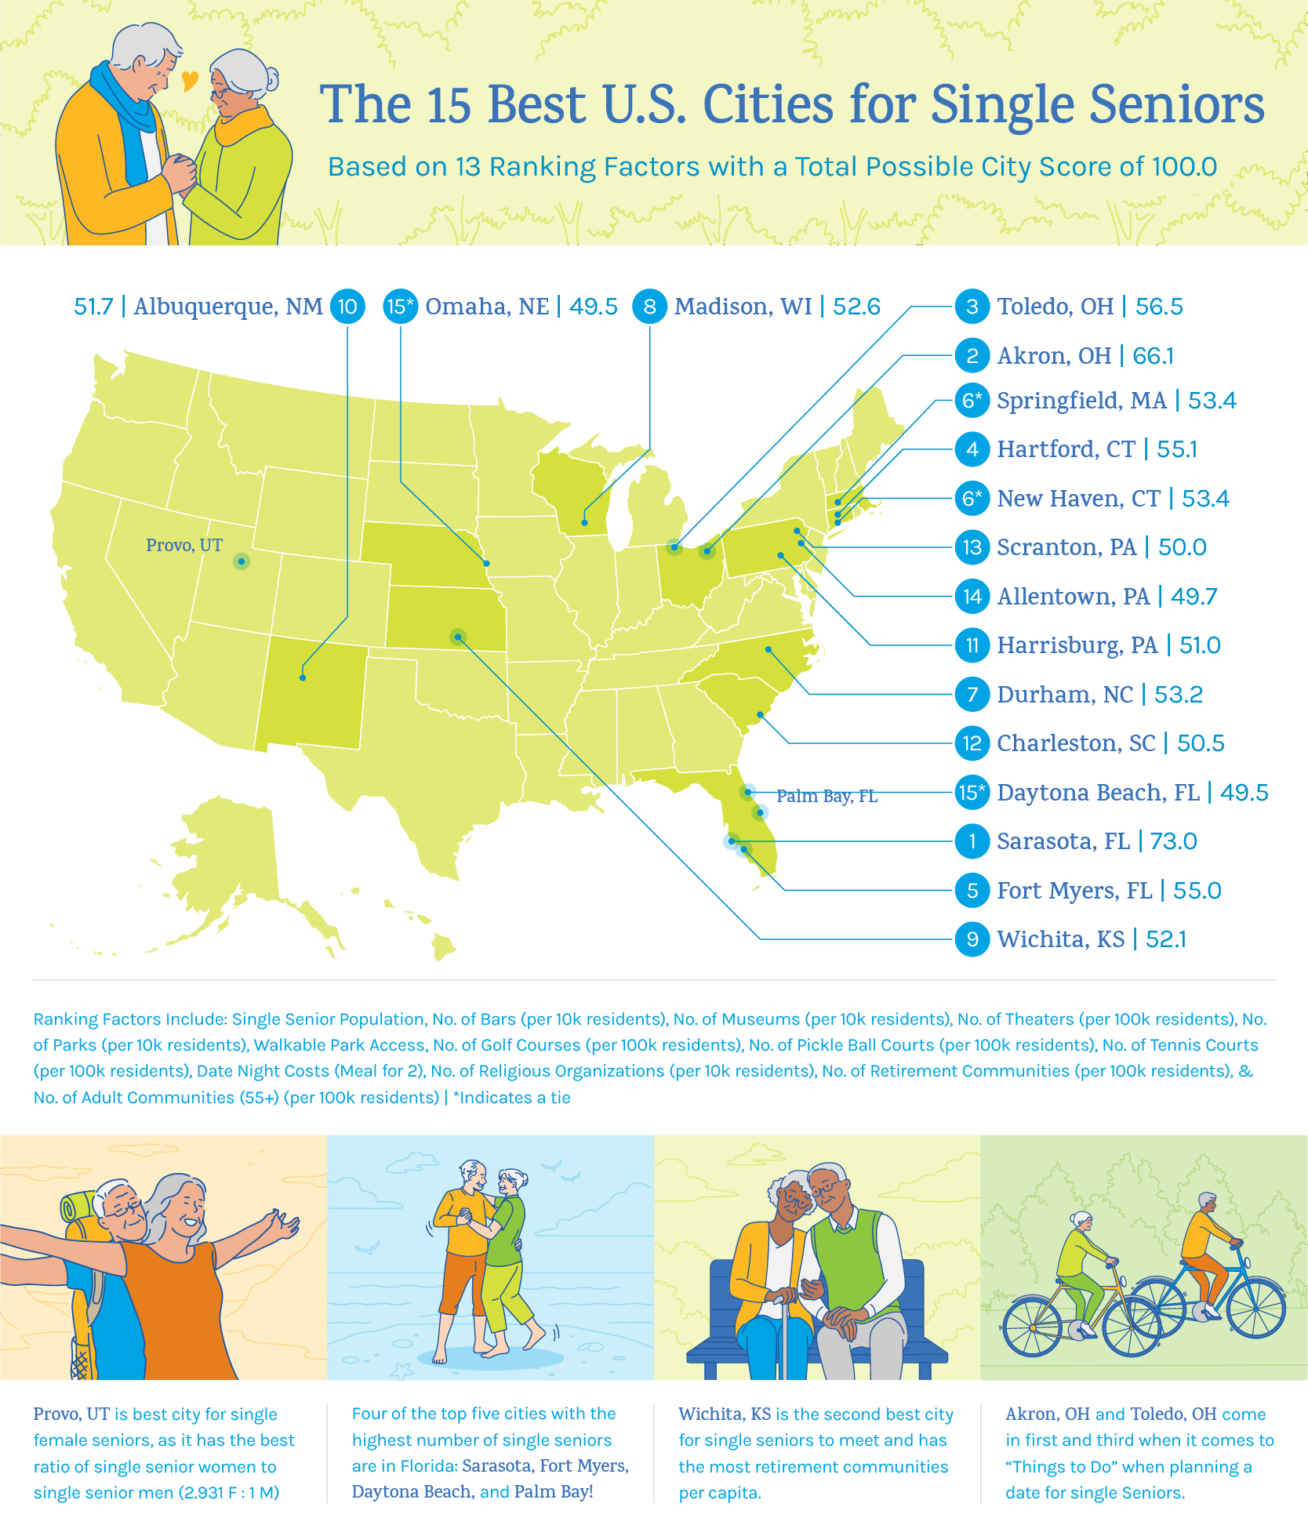 A map highlighting the 15 best U.S. cities for single seniors.